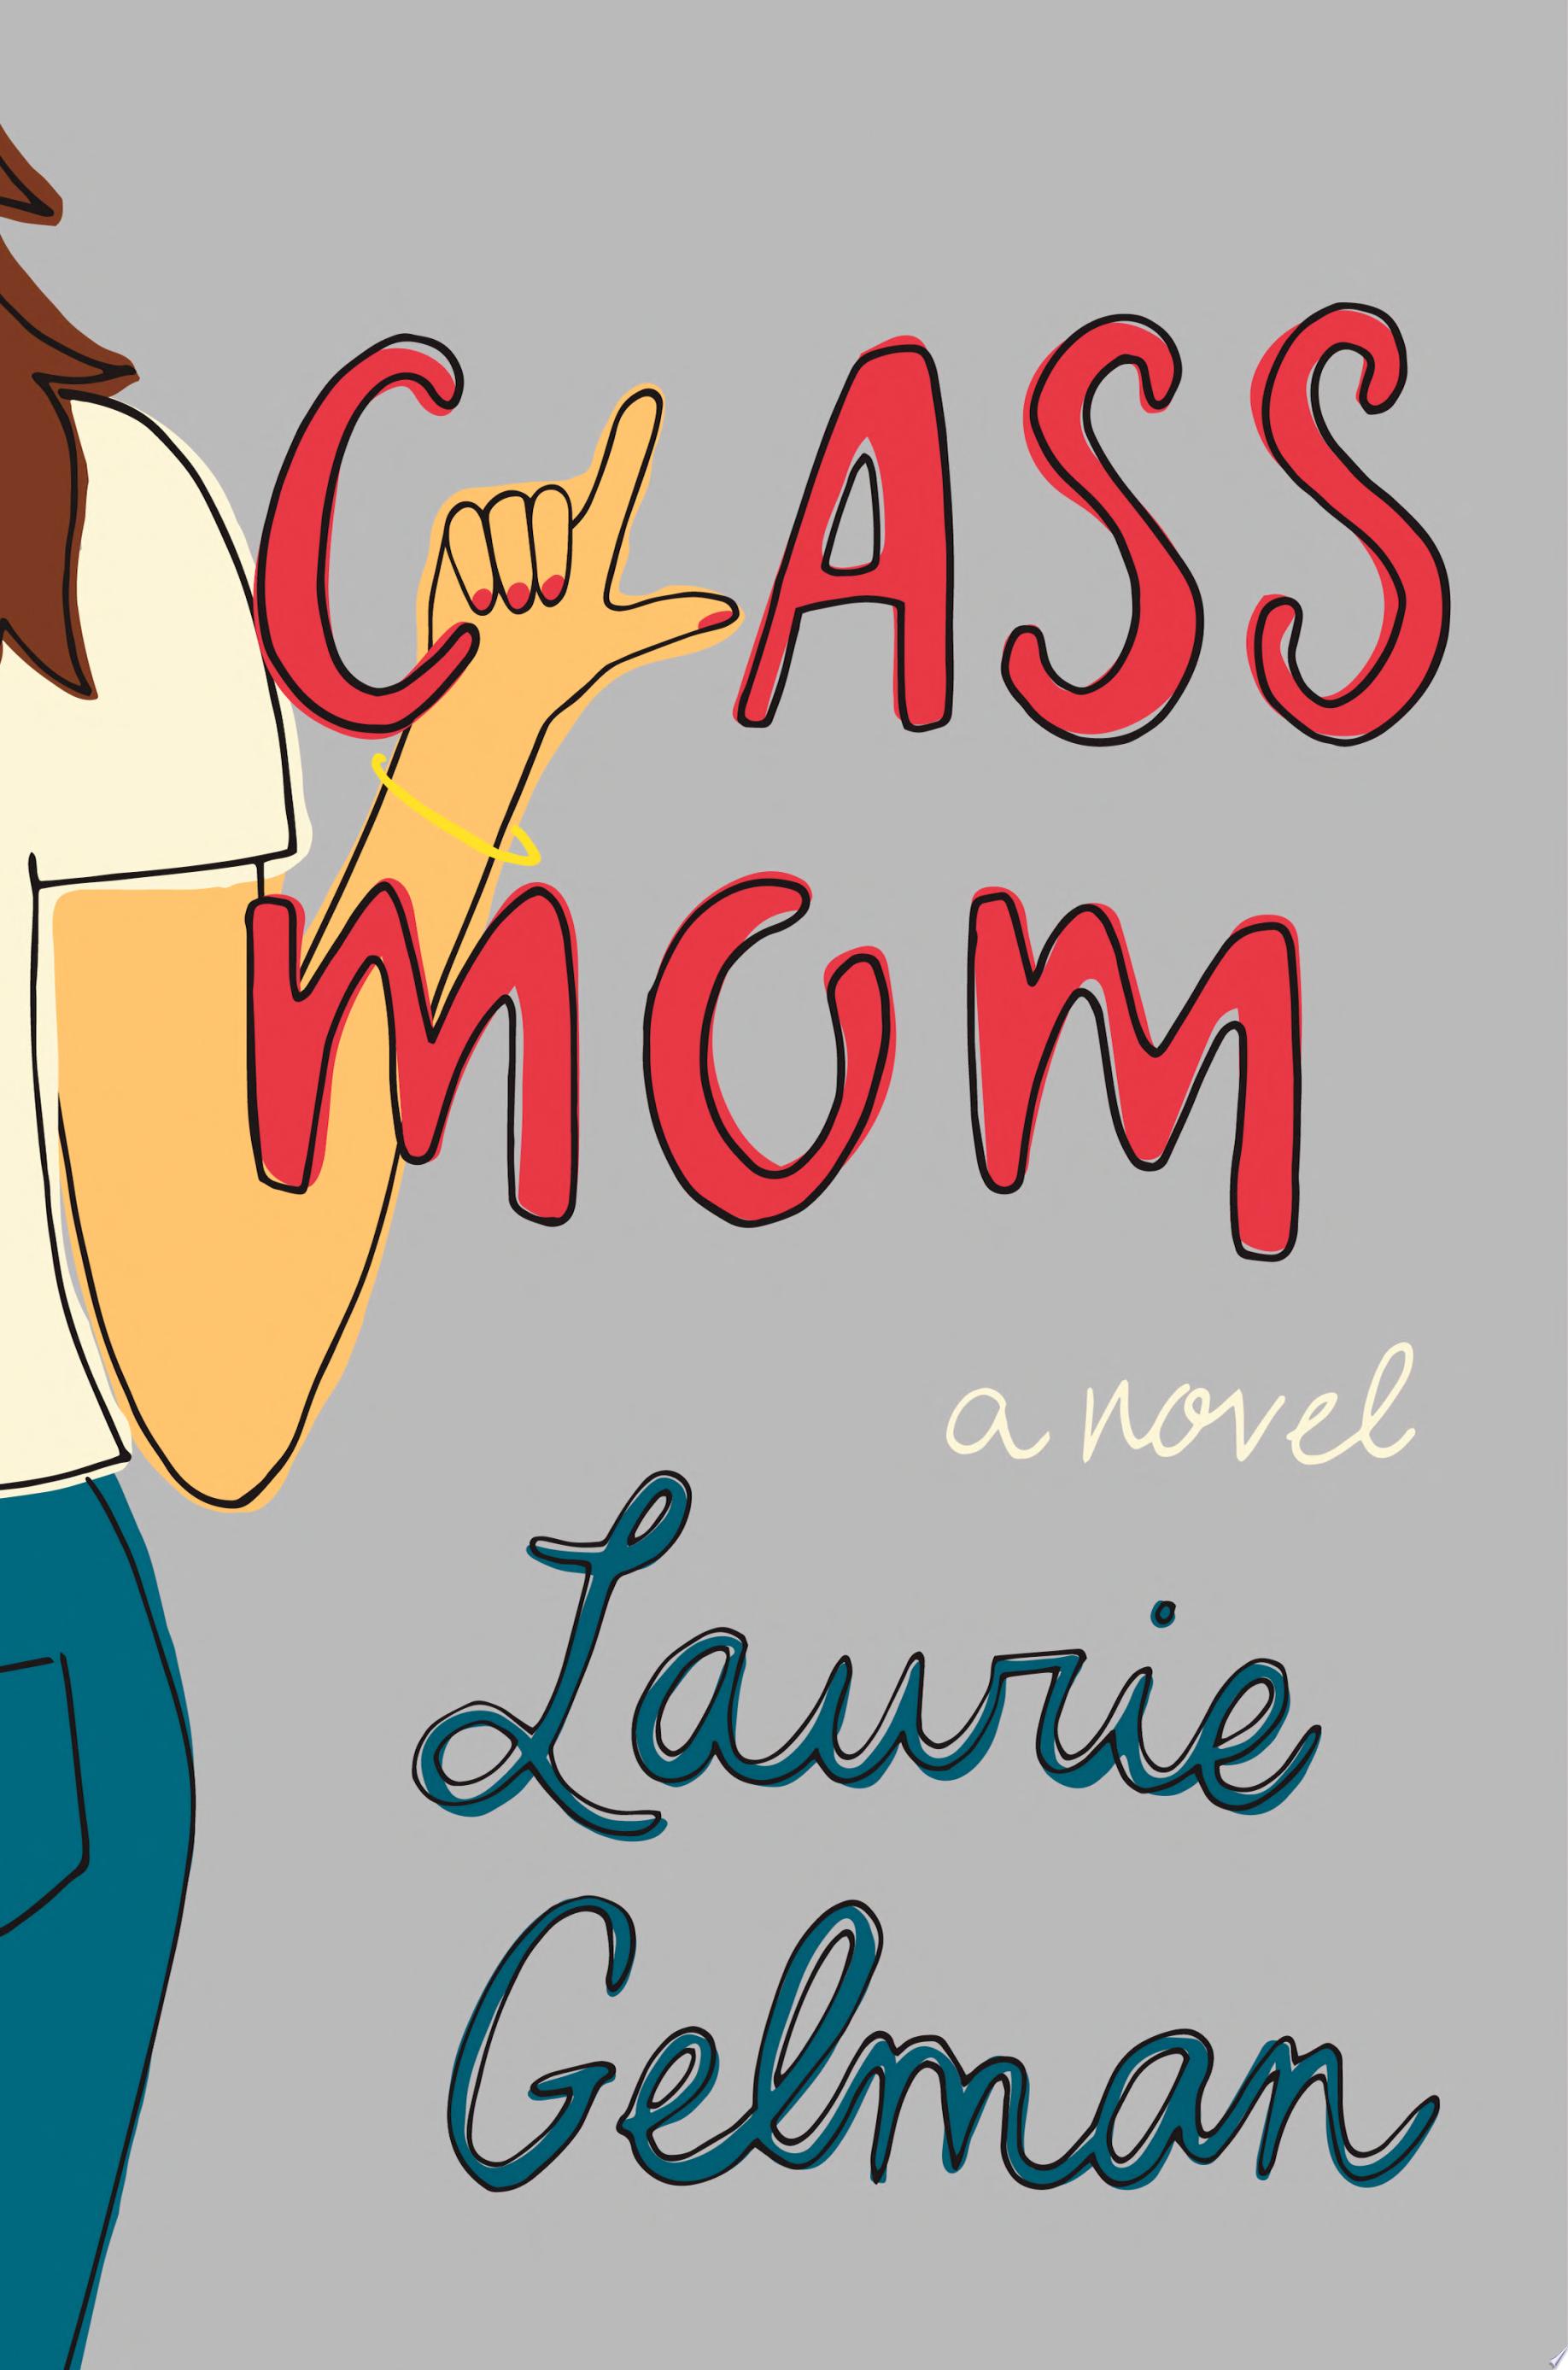 Image for "Class Mom"